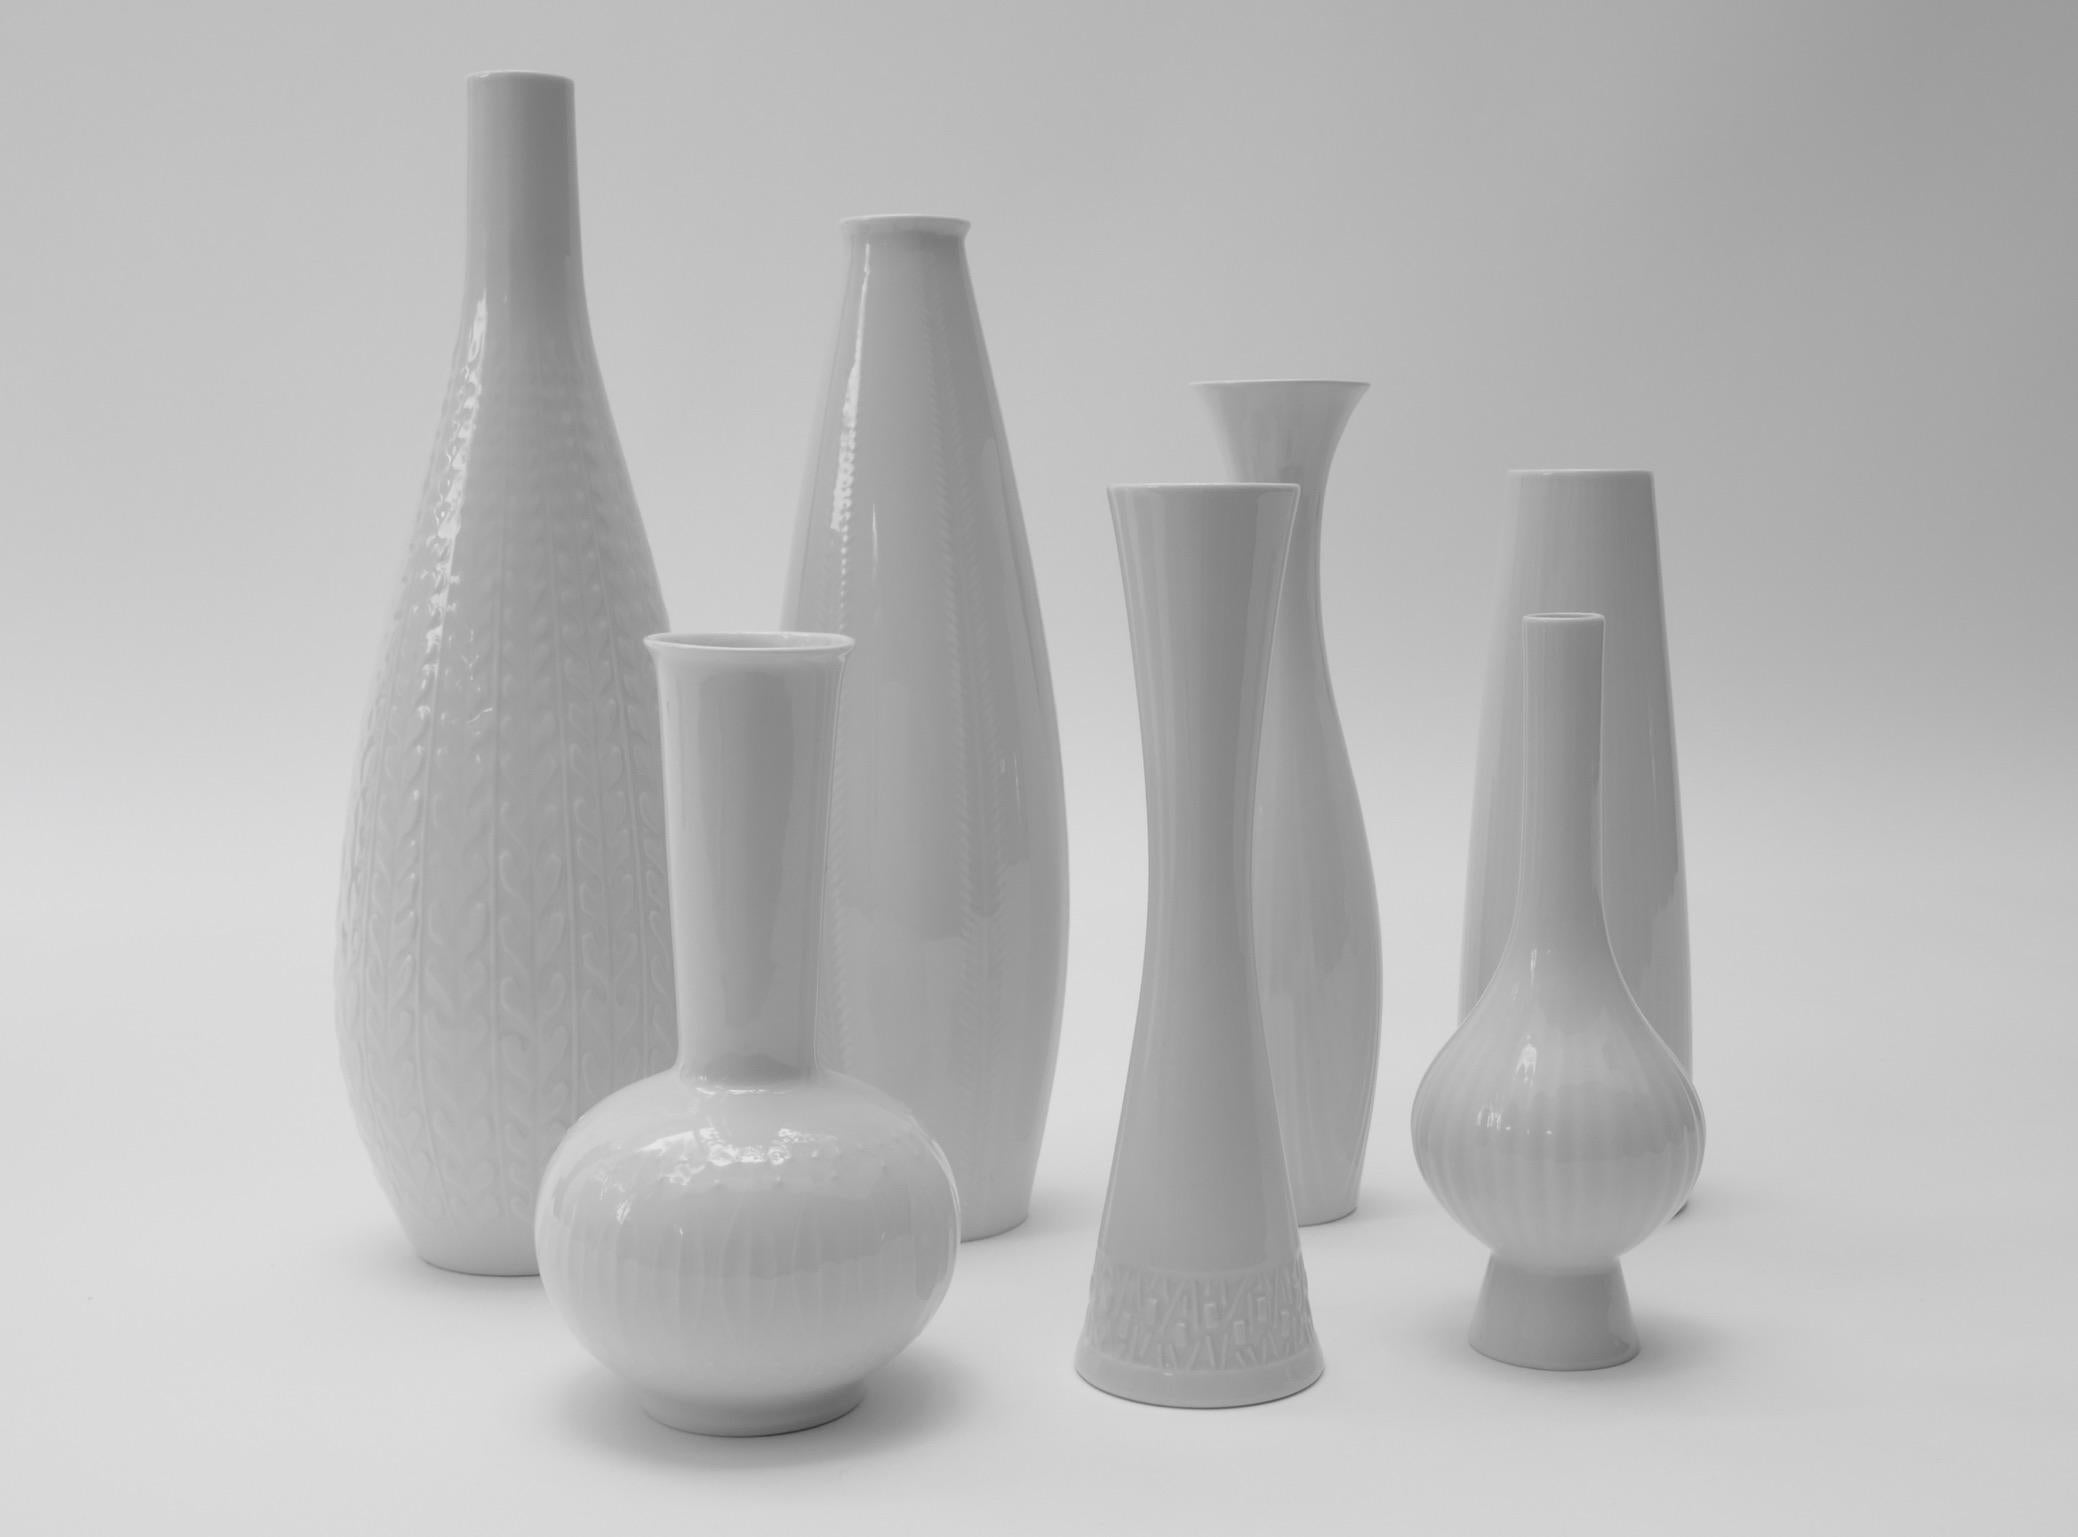 Set of seven white porcelain vases, Germany, 1970s

The measurements as seen on the picture 3 from the tallest vase to the smallest are :
H35 cm/ D11cm
H31cm/D9cm
H24cm/D7cm
H23cm/D7cm
H23cm/D4cm
H20cm/D8cm
H19cm/D11cm



